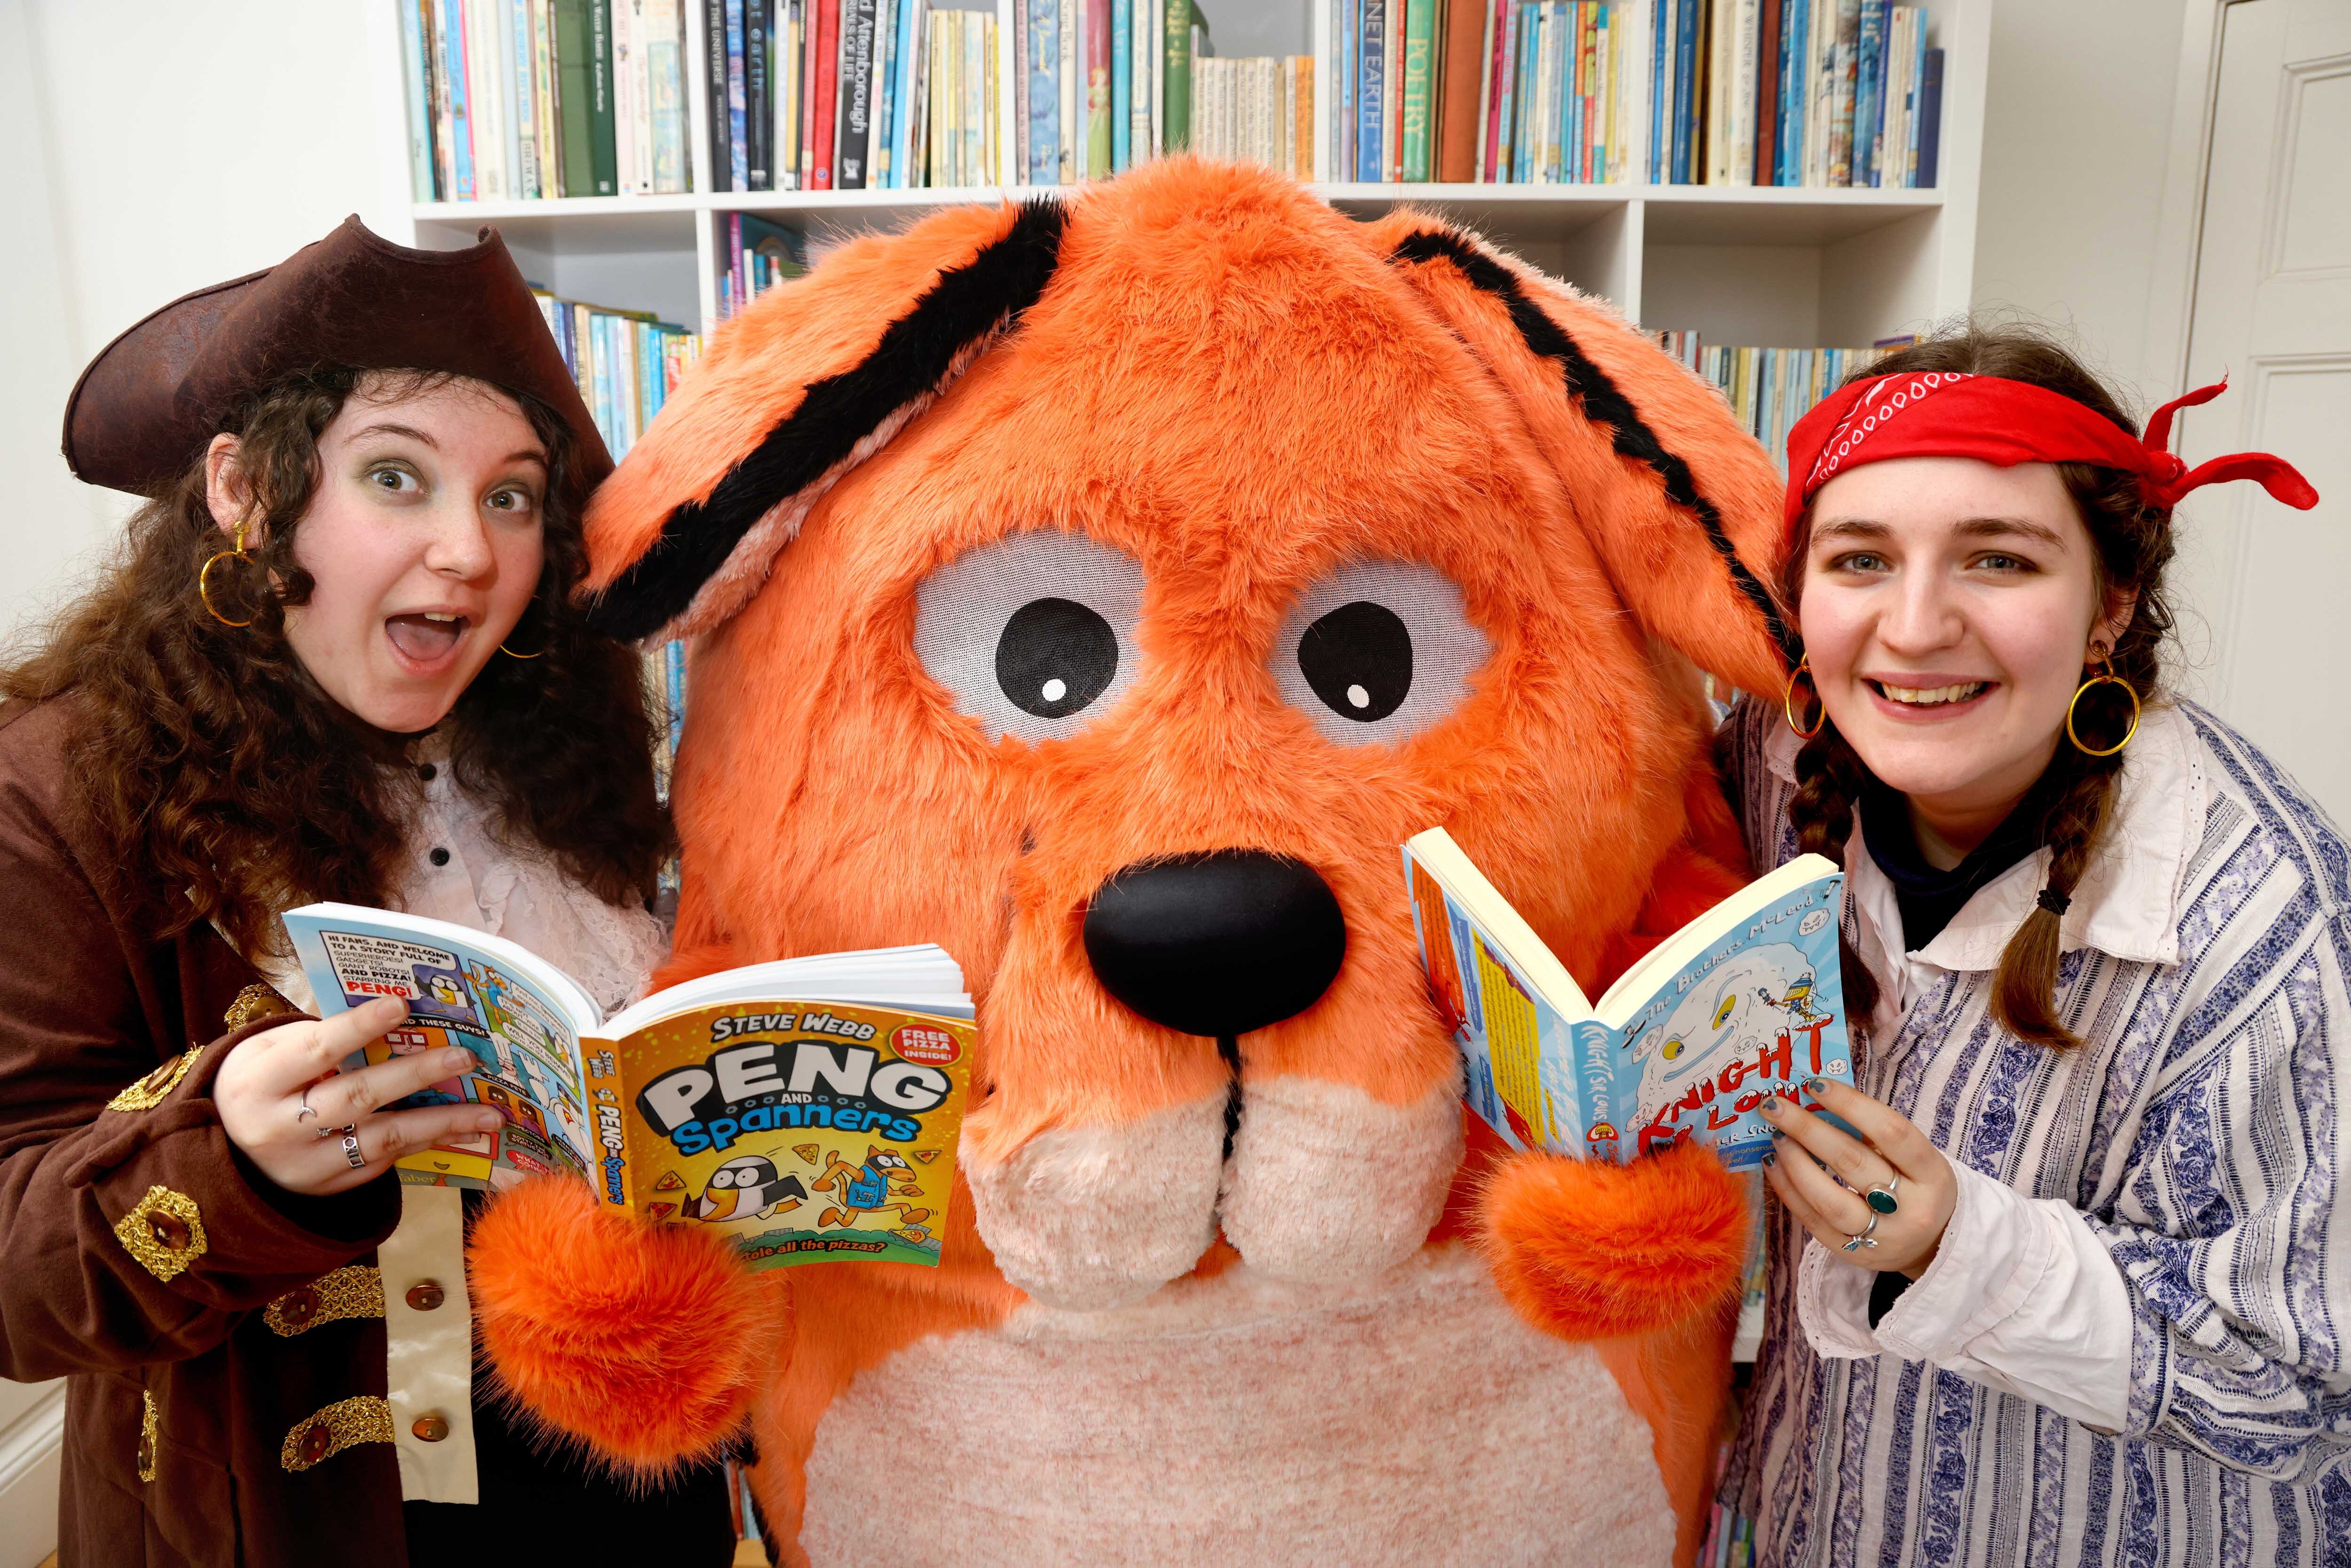 Big DoG and the Moat Brae Storyweavers, dressed as pirate, are stood in front of a book case, holding Big DoG festival titles.